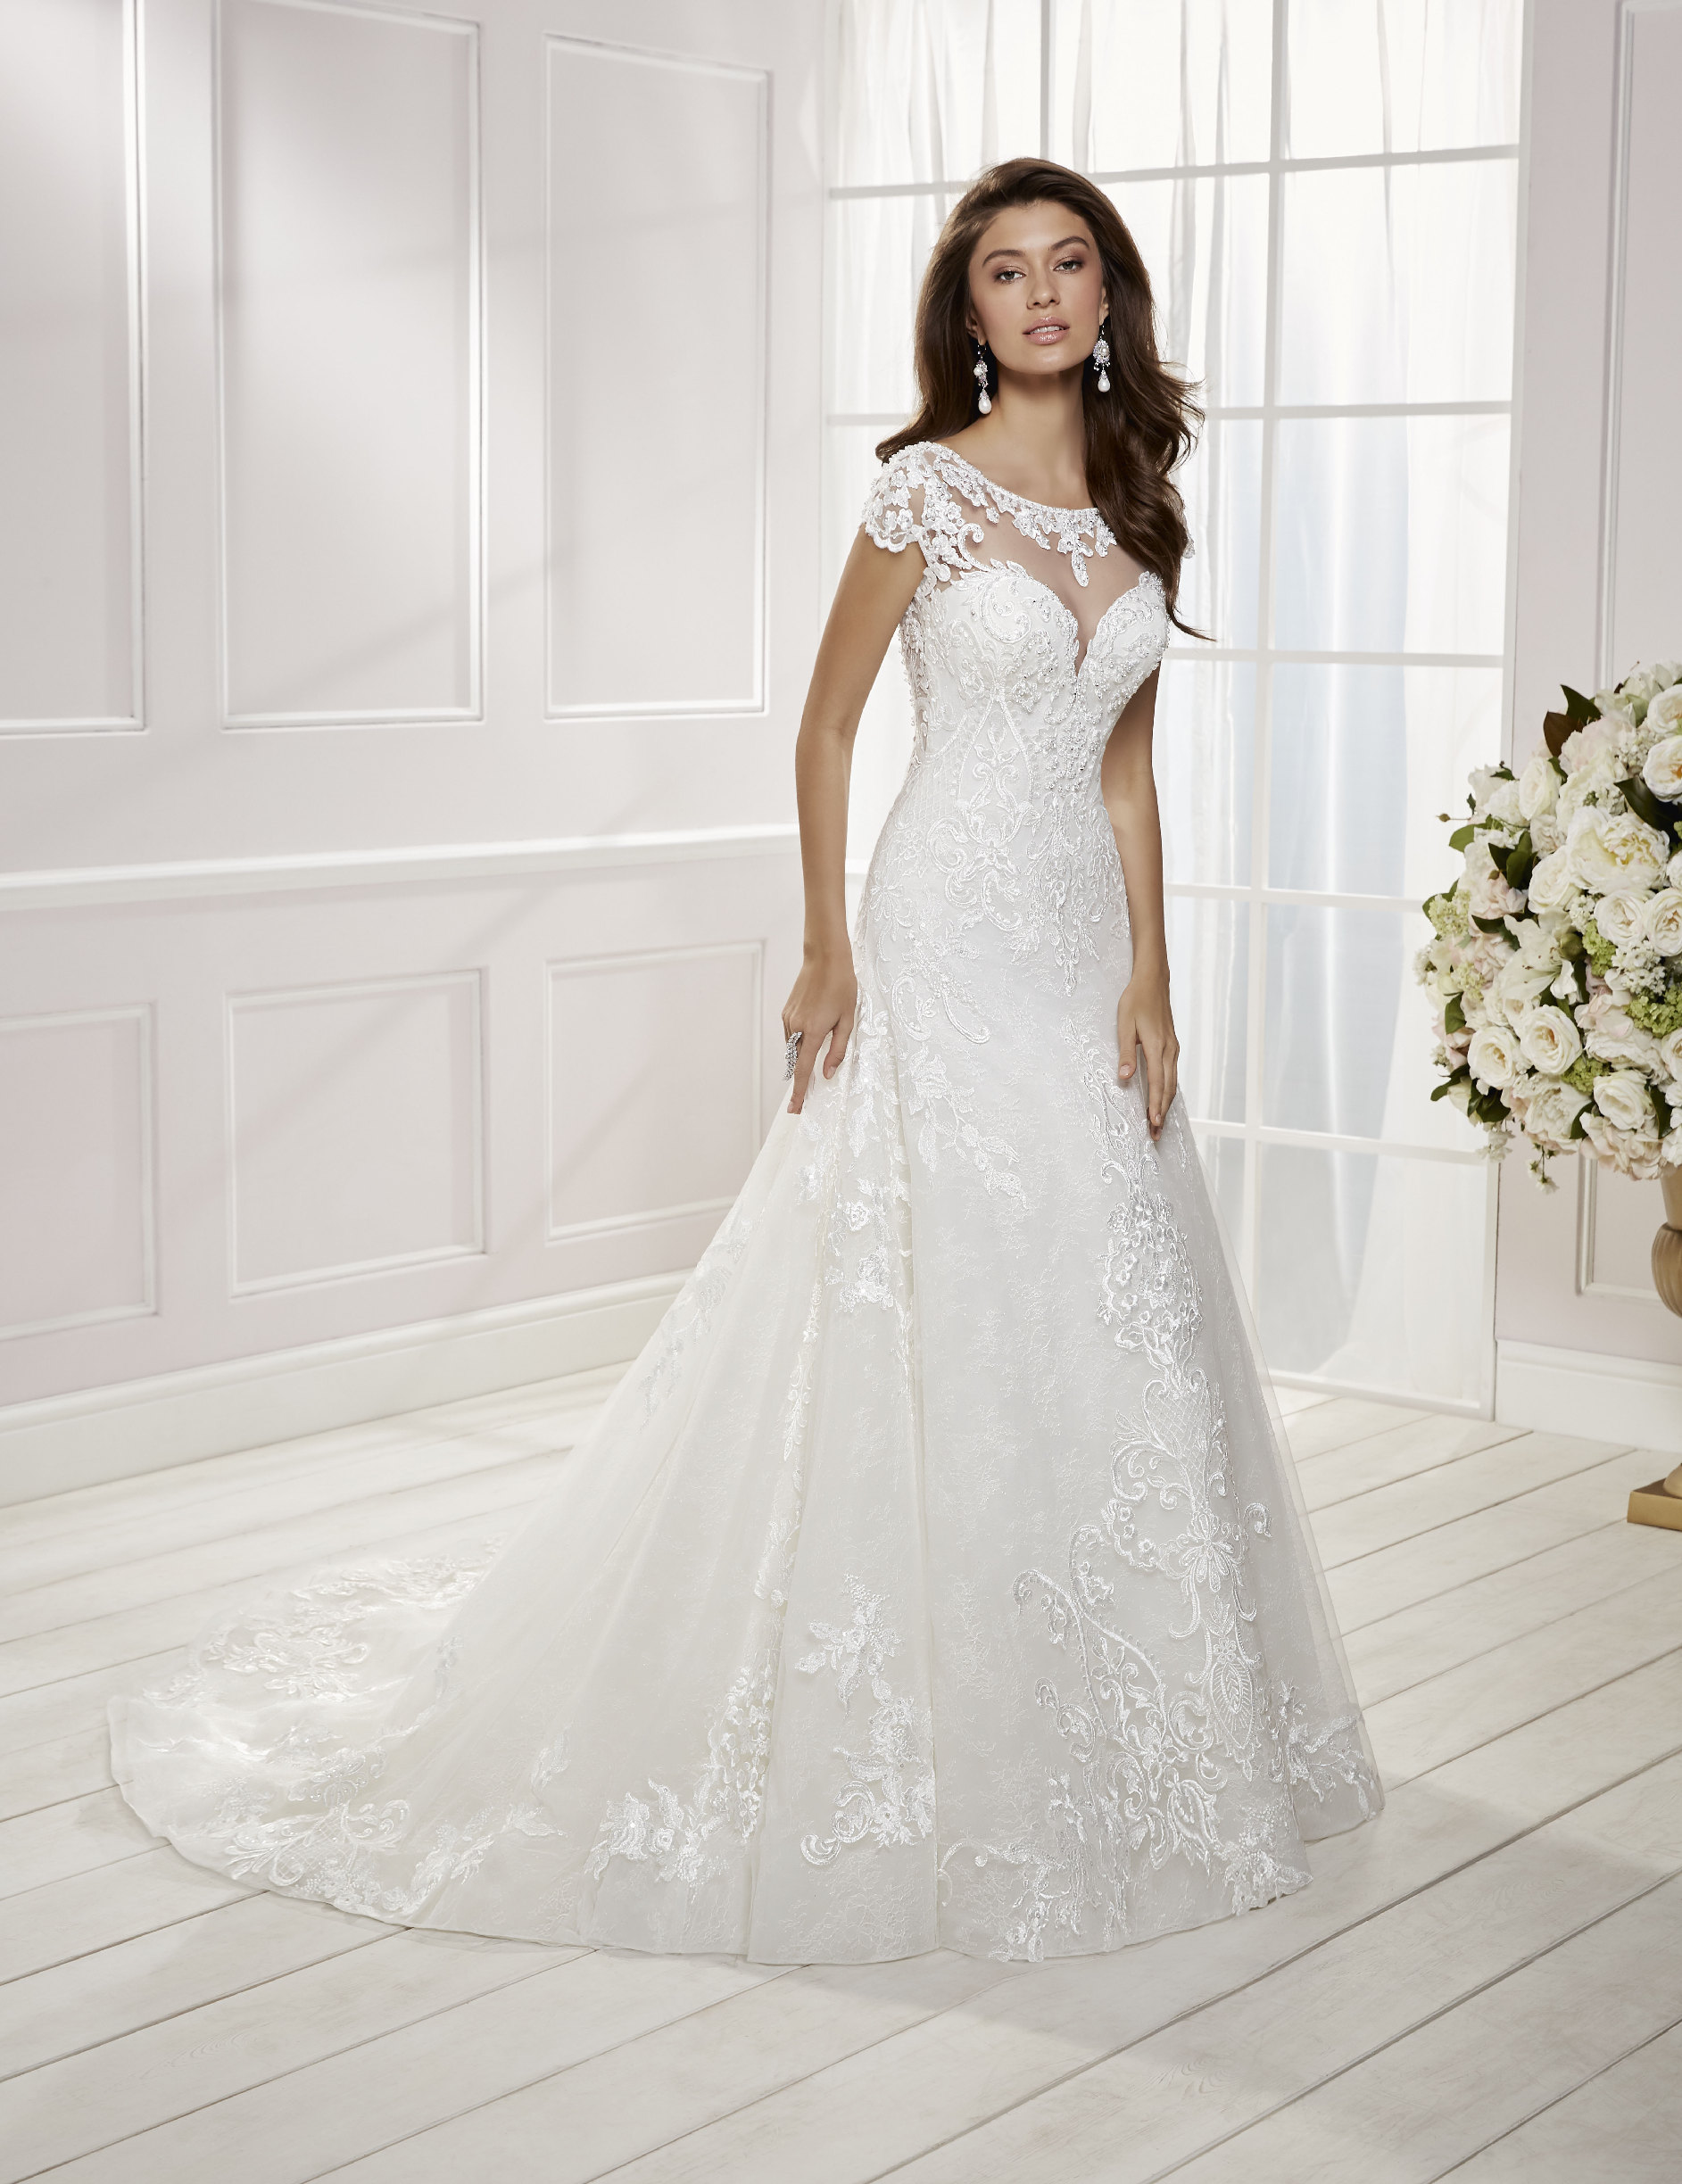 Model in Ronald Joyce wedding dress style 69475 – a lace A-line dress with an illusion sweetheart neckline for brides who need a wedding dress quickly.